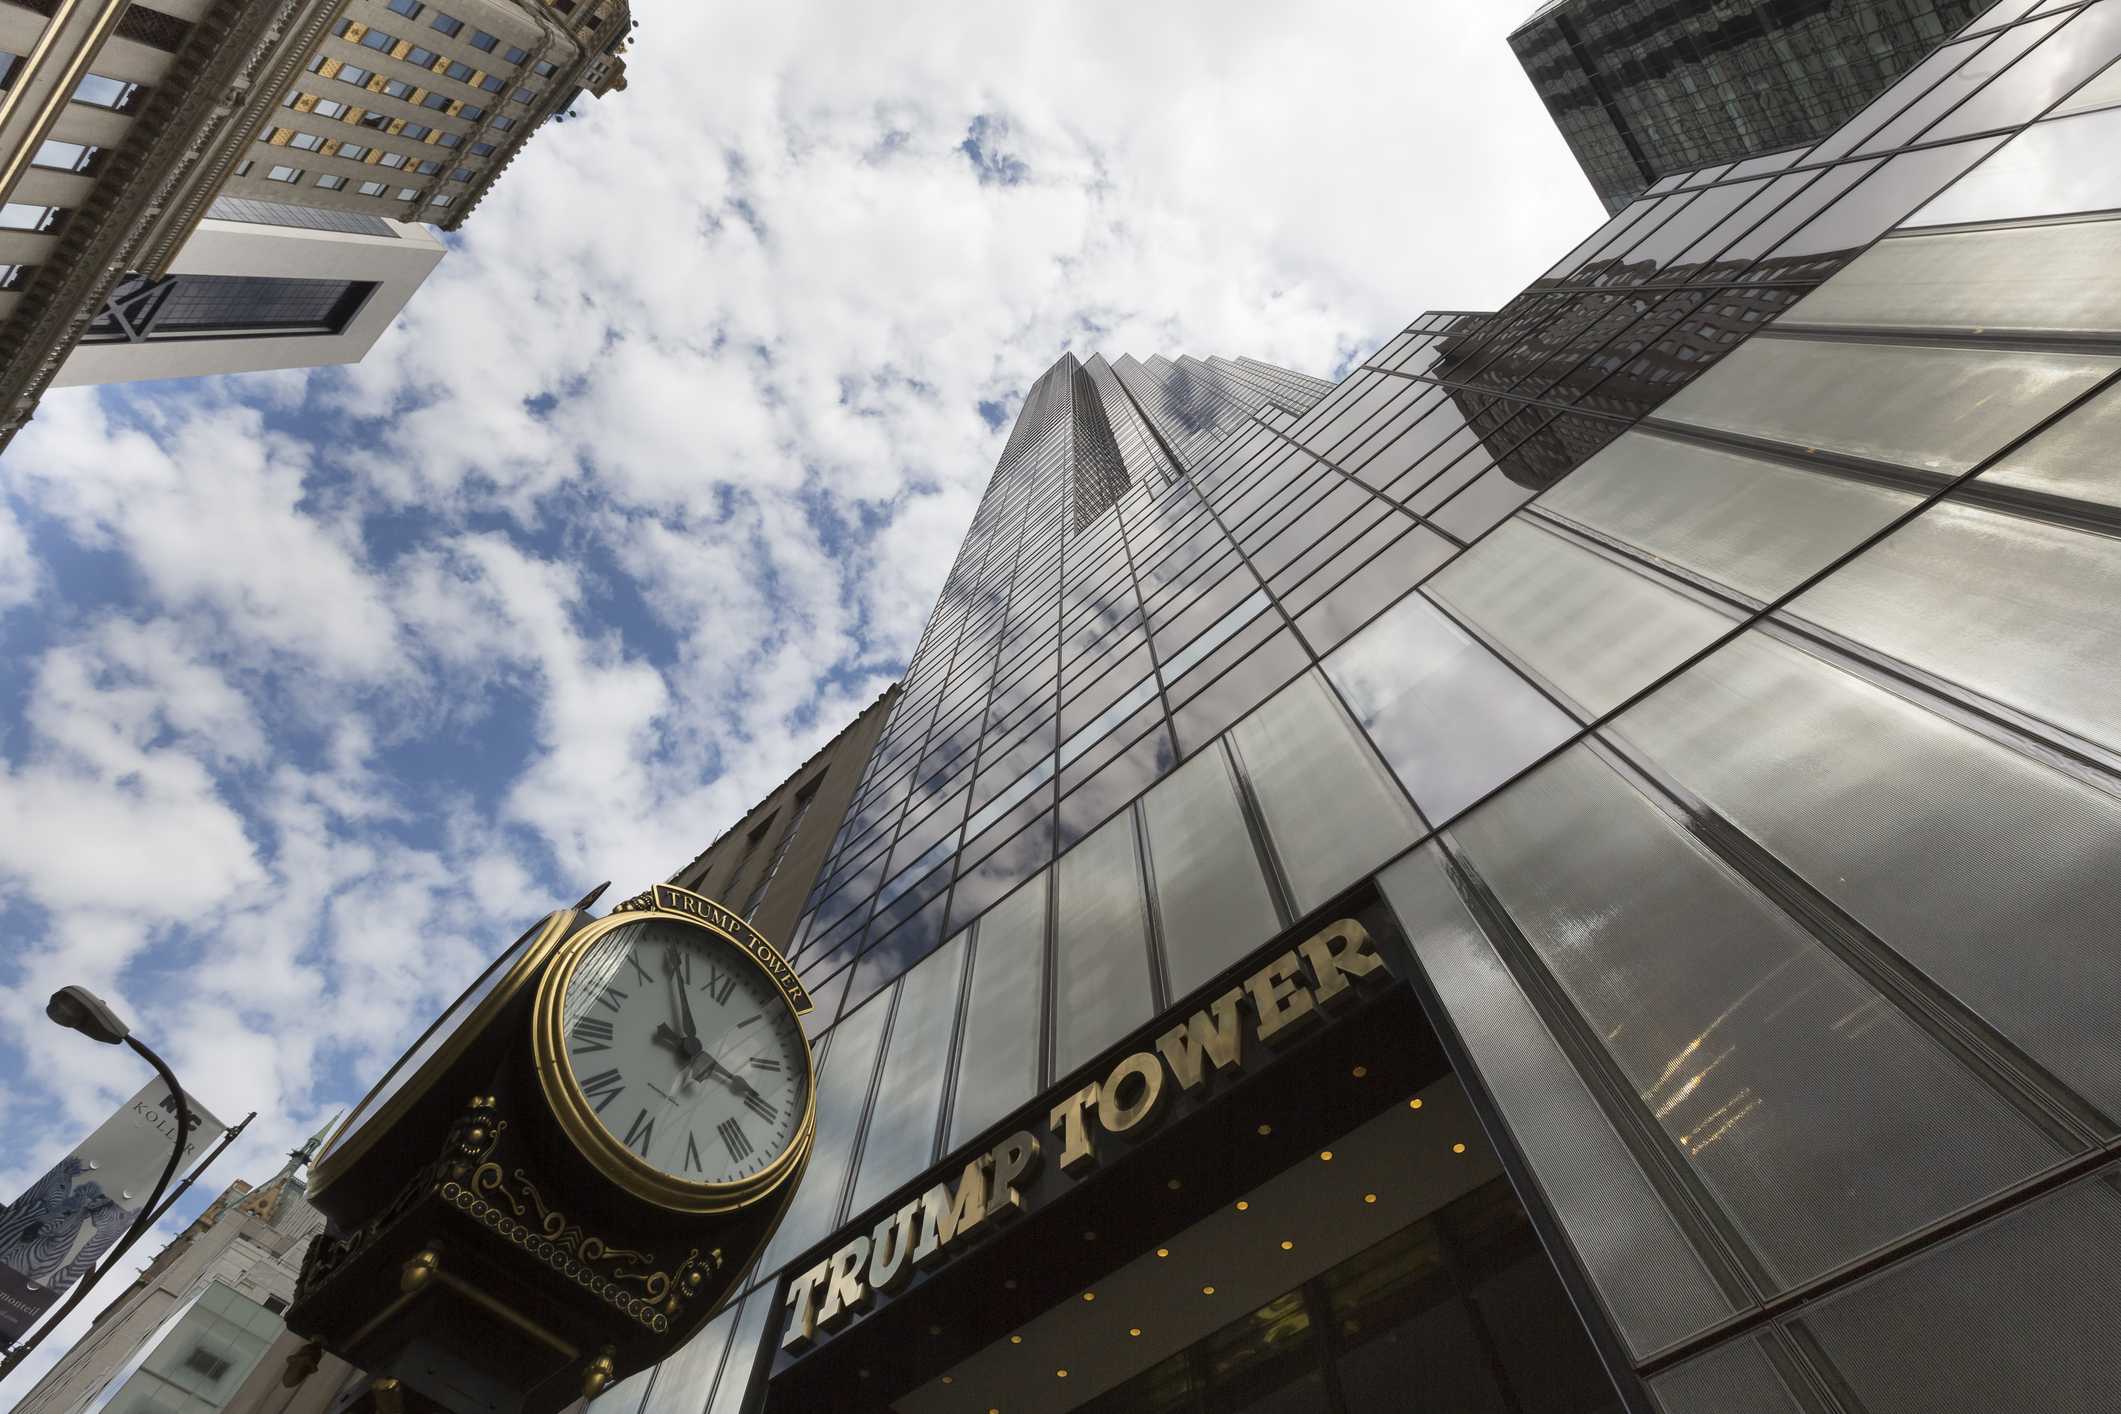 Fire breaks out at Trump Tower in New York City